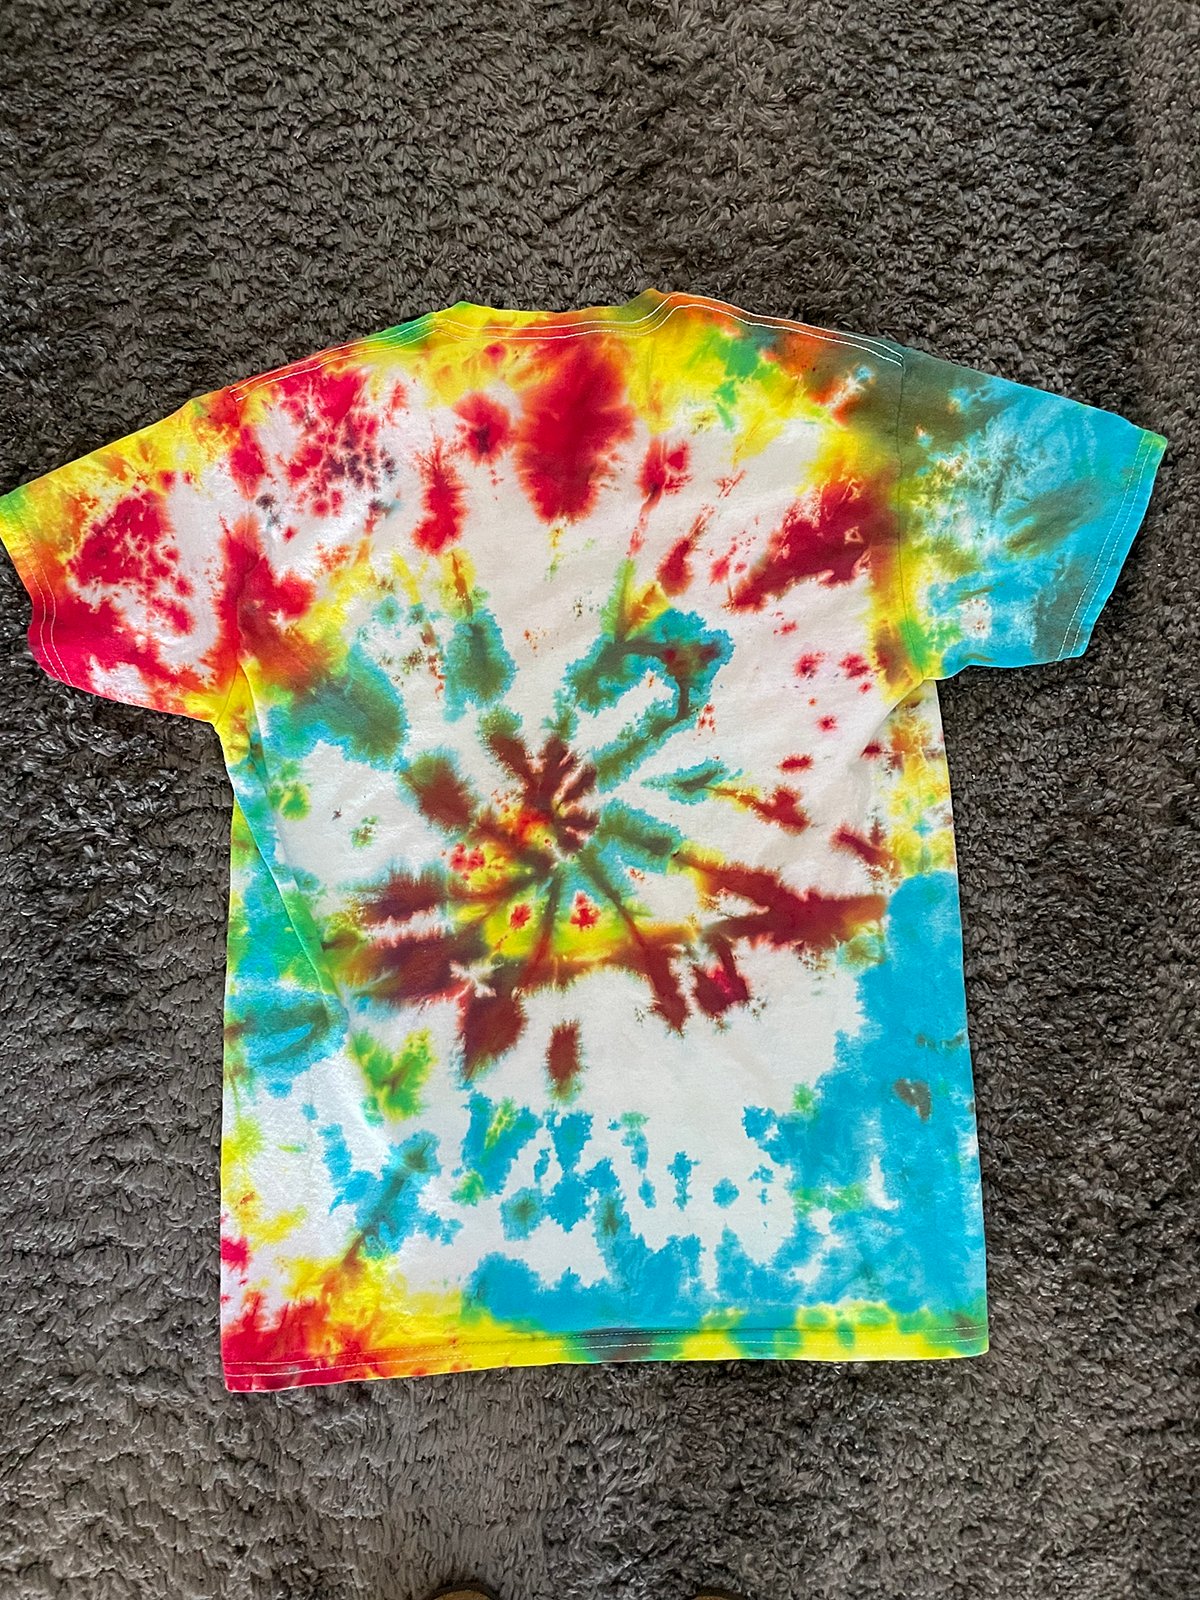 Completed DIY spiral tie dye t shirt